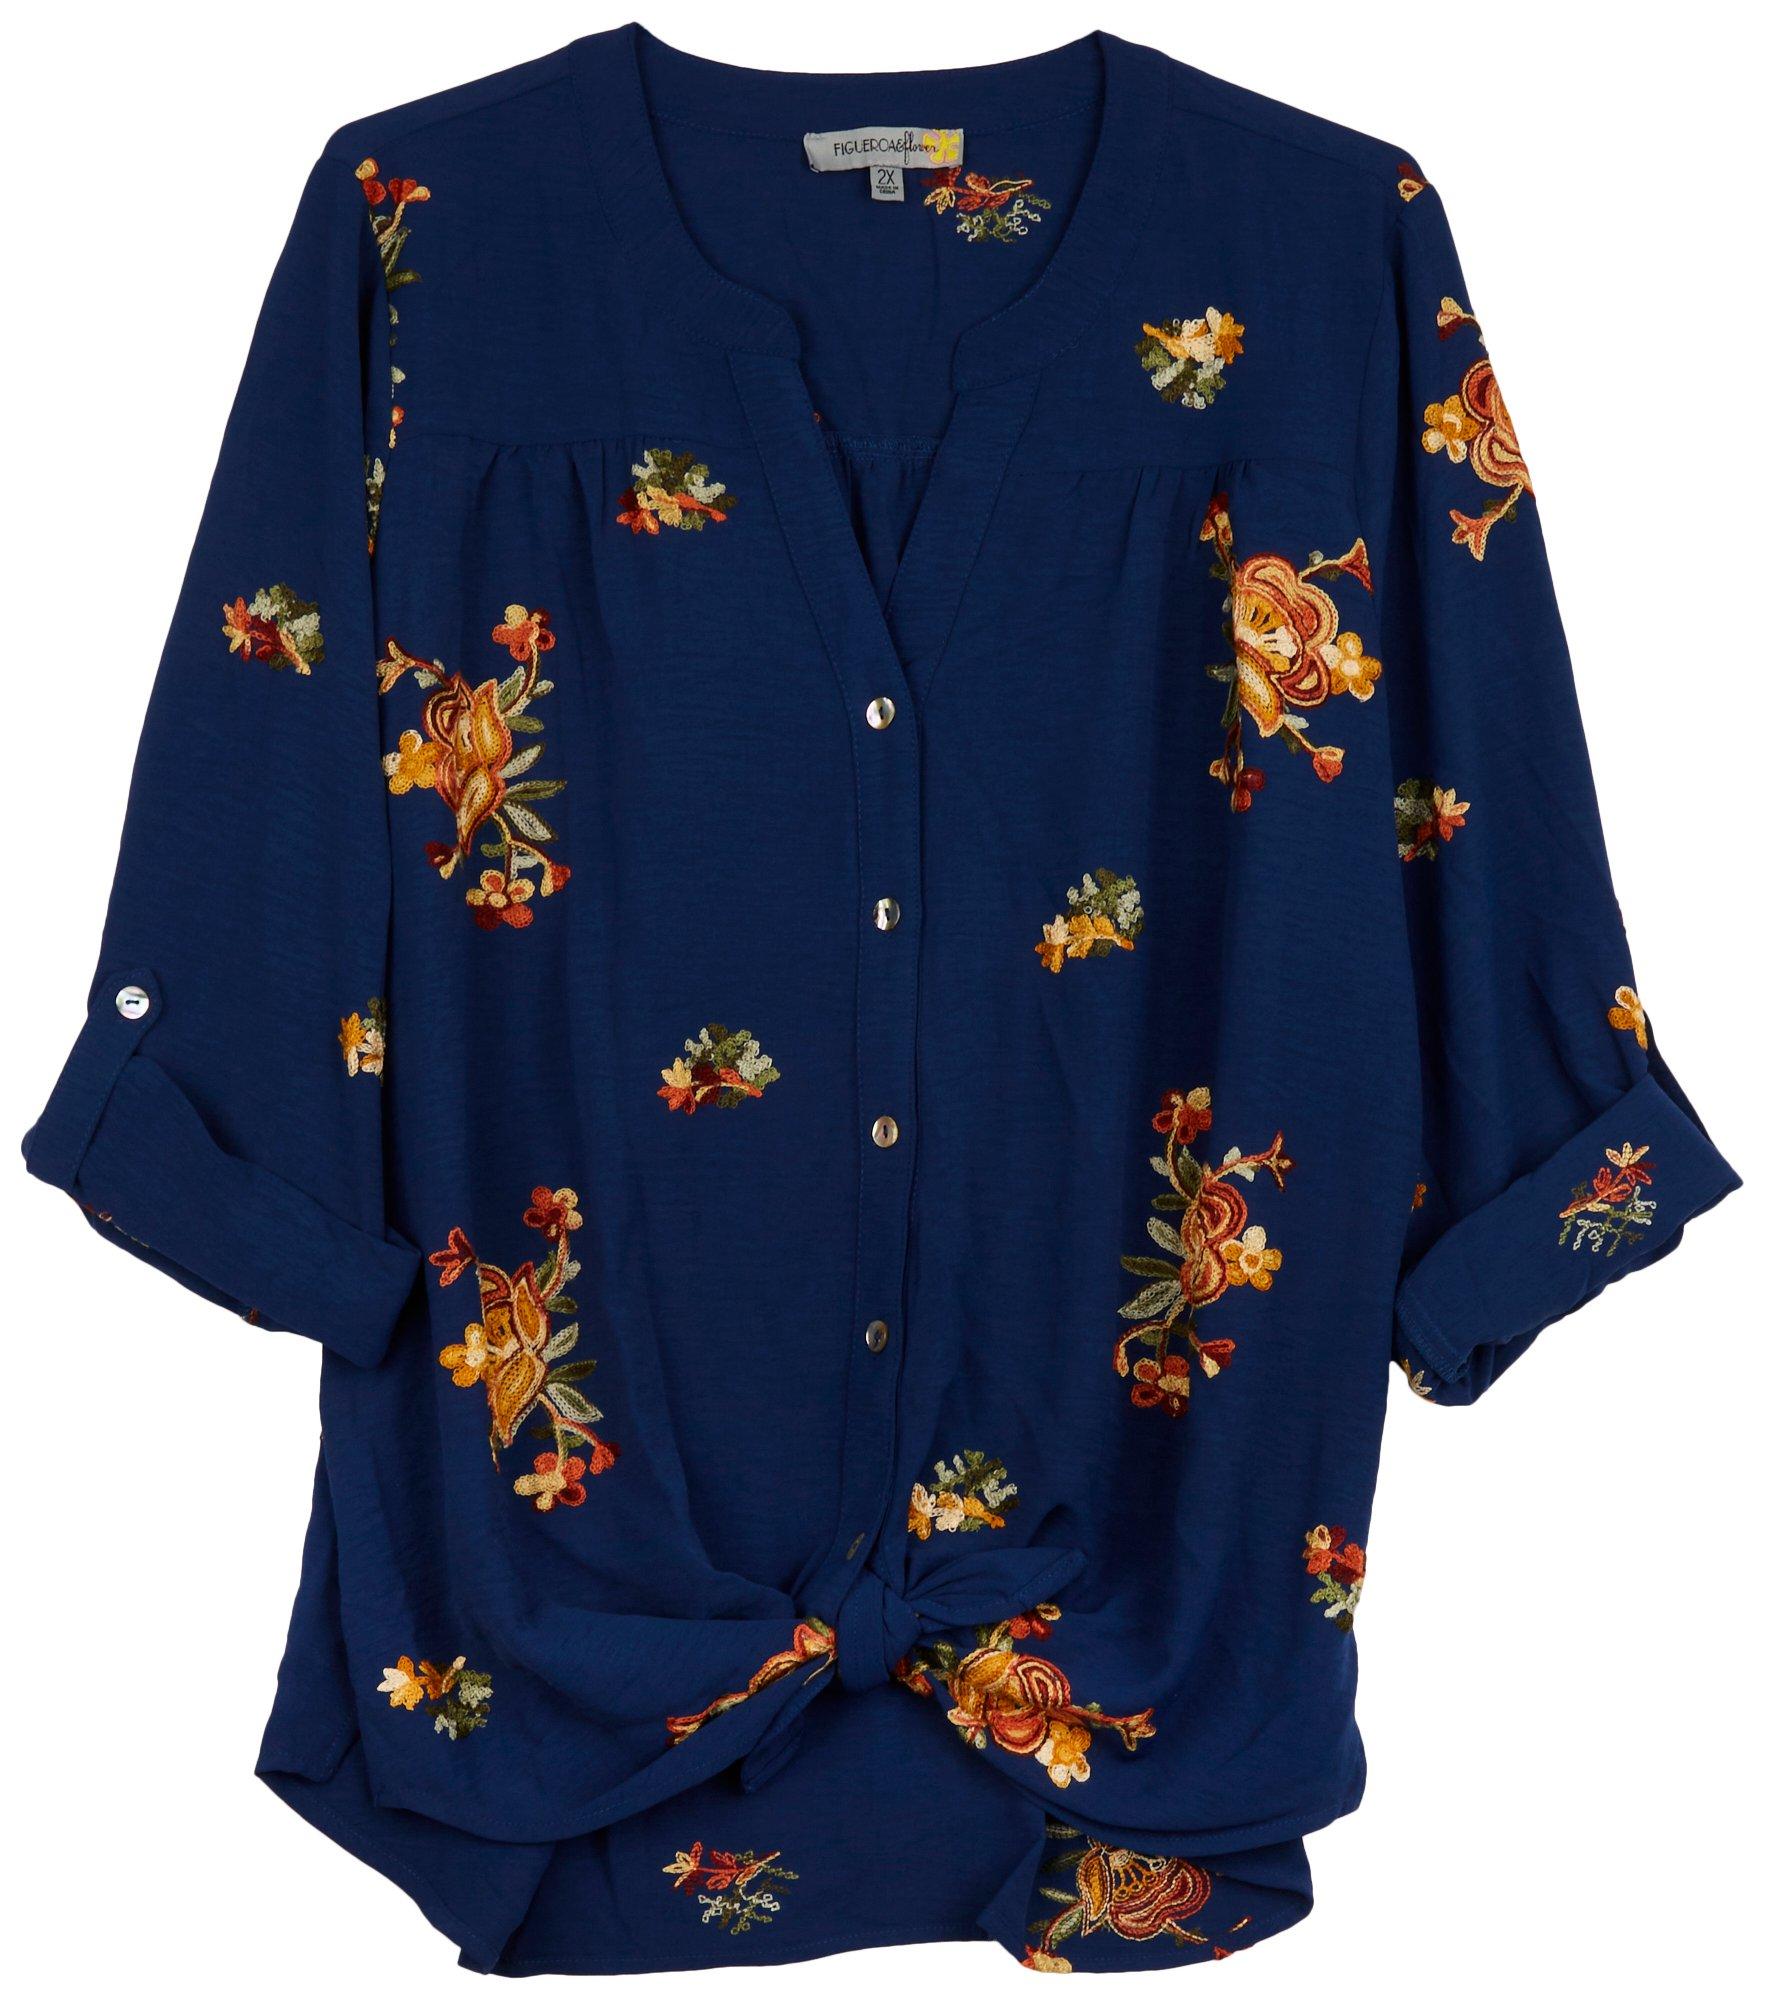 Figueroa and Flower Plus Embroidered 3/4 Sleeve Top